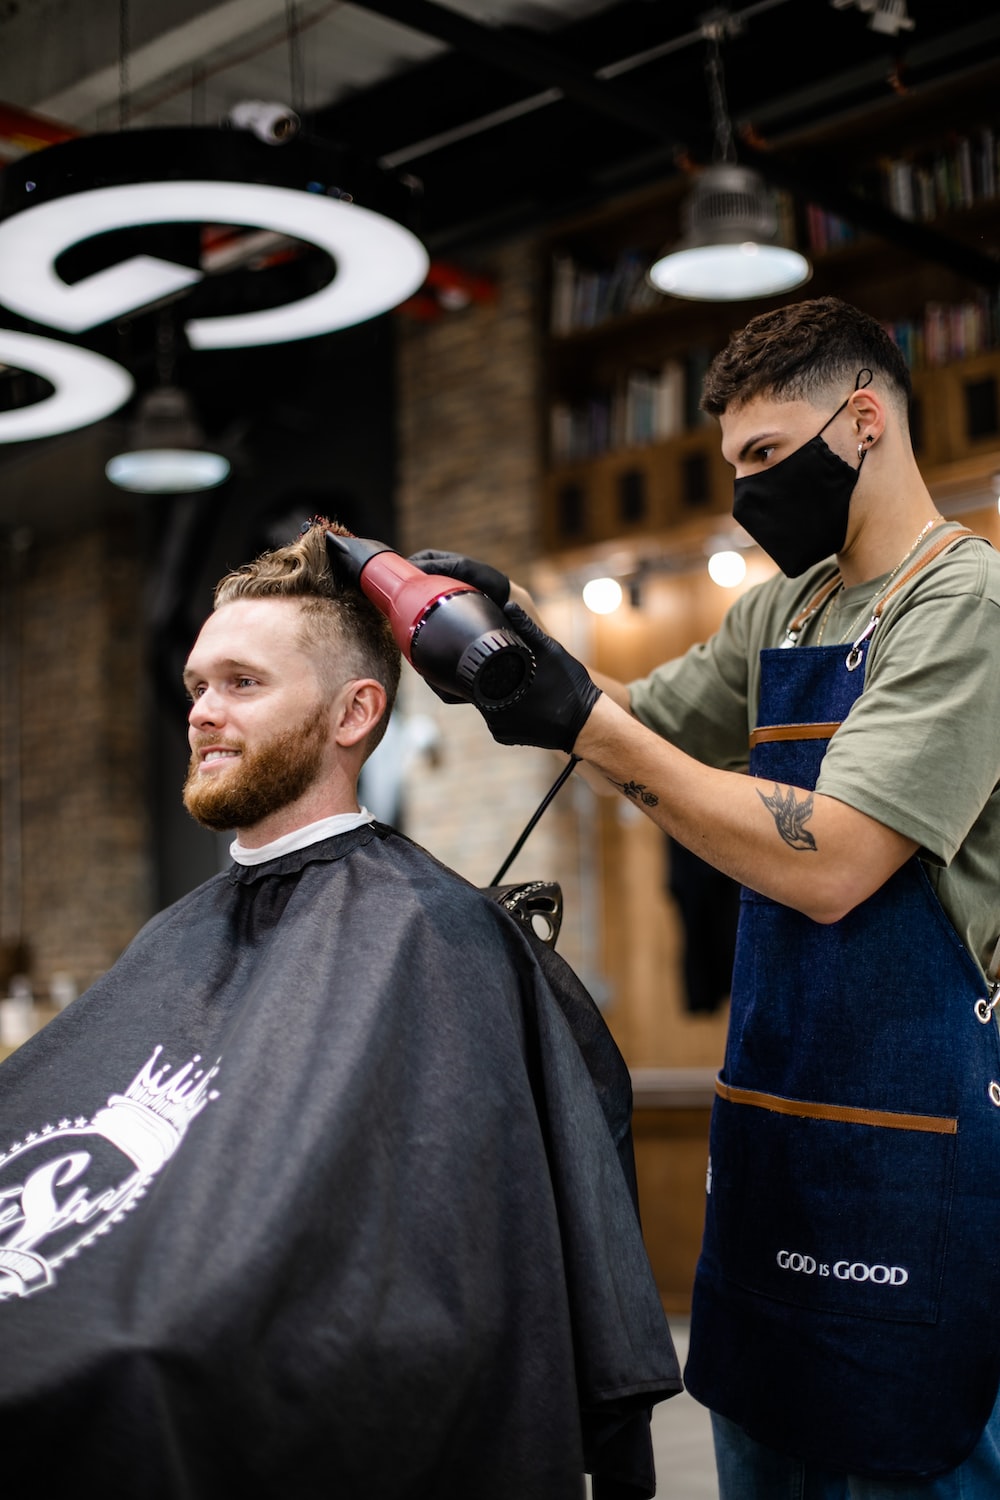 Barber Shop Picture. Download Free Image